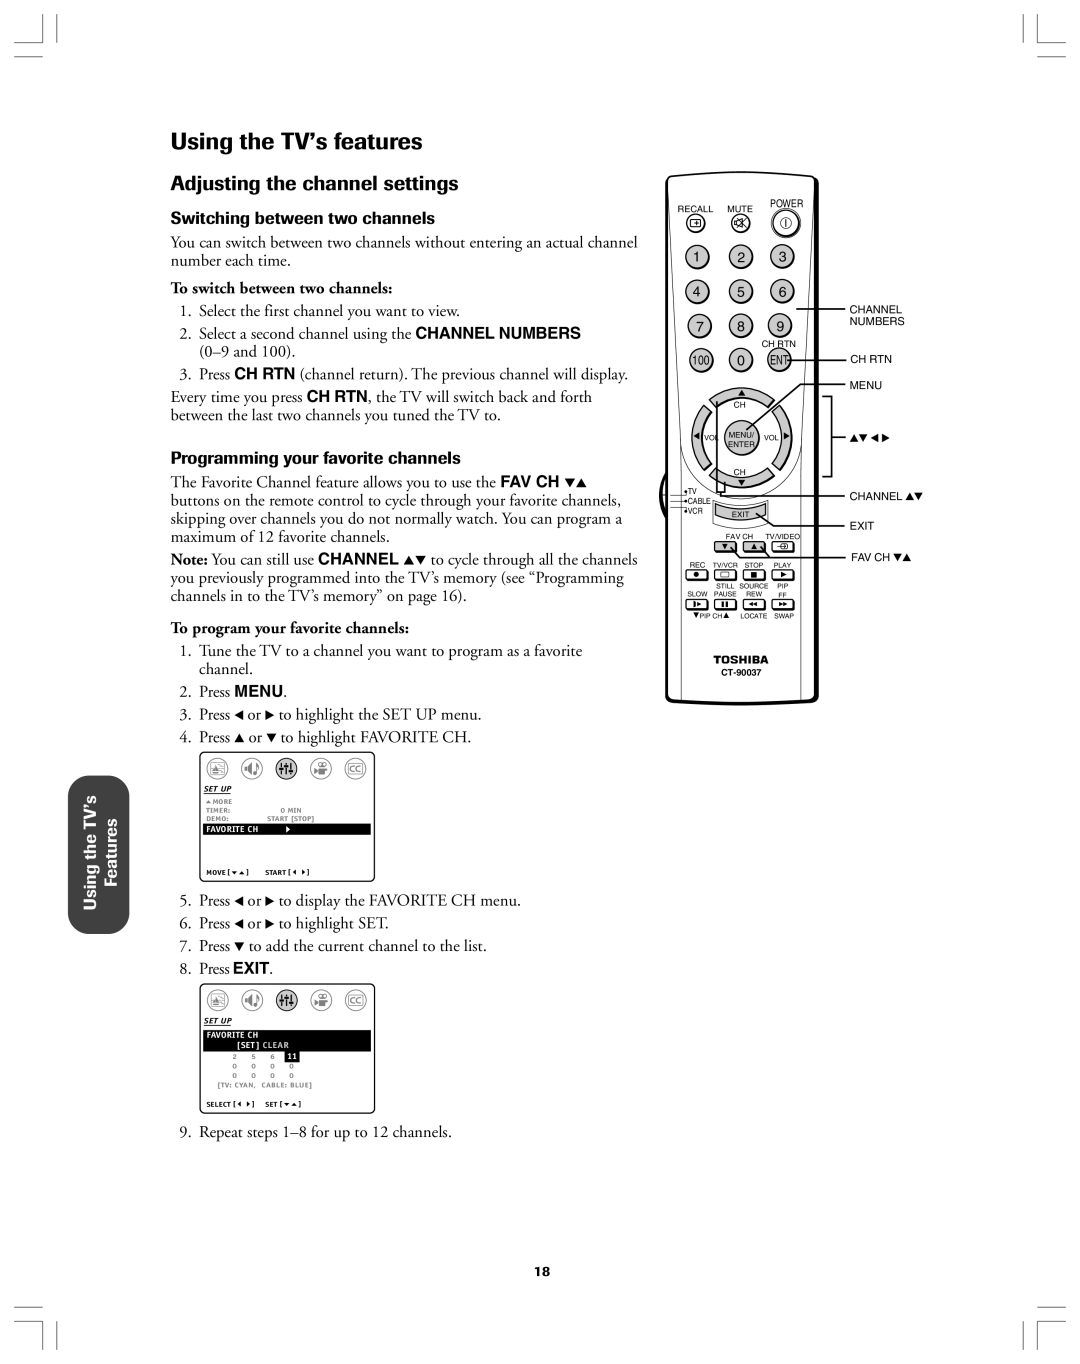 Toshiba 34AS42 owner manual Using the TVÕs features, Adjusting the channel settings, Switching between two channels 